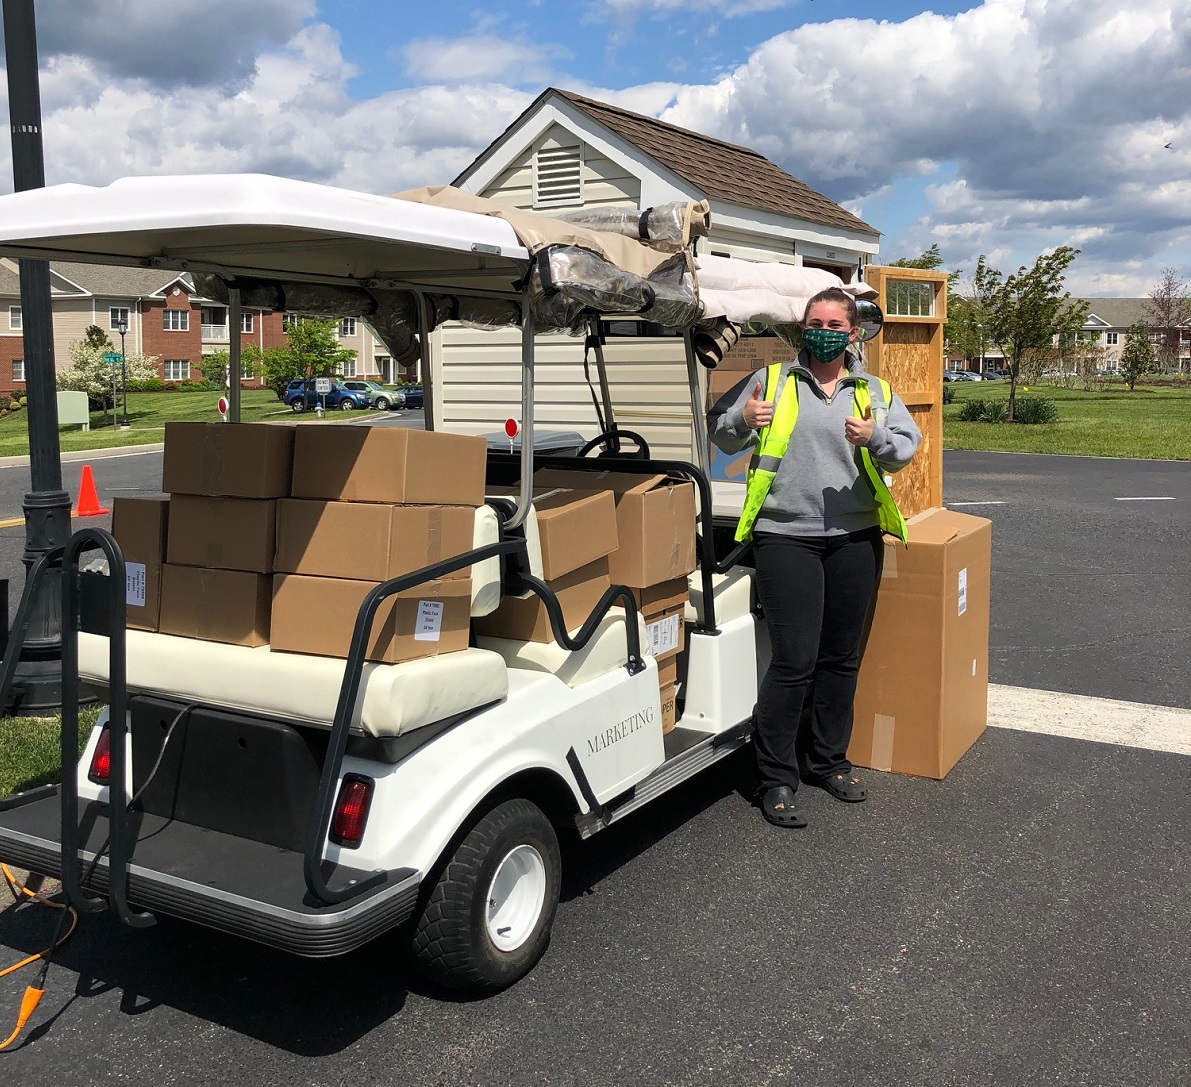 Golf Cart with boxes of supply being deliverd to The Glebe retirement community